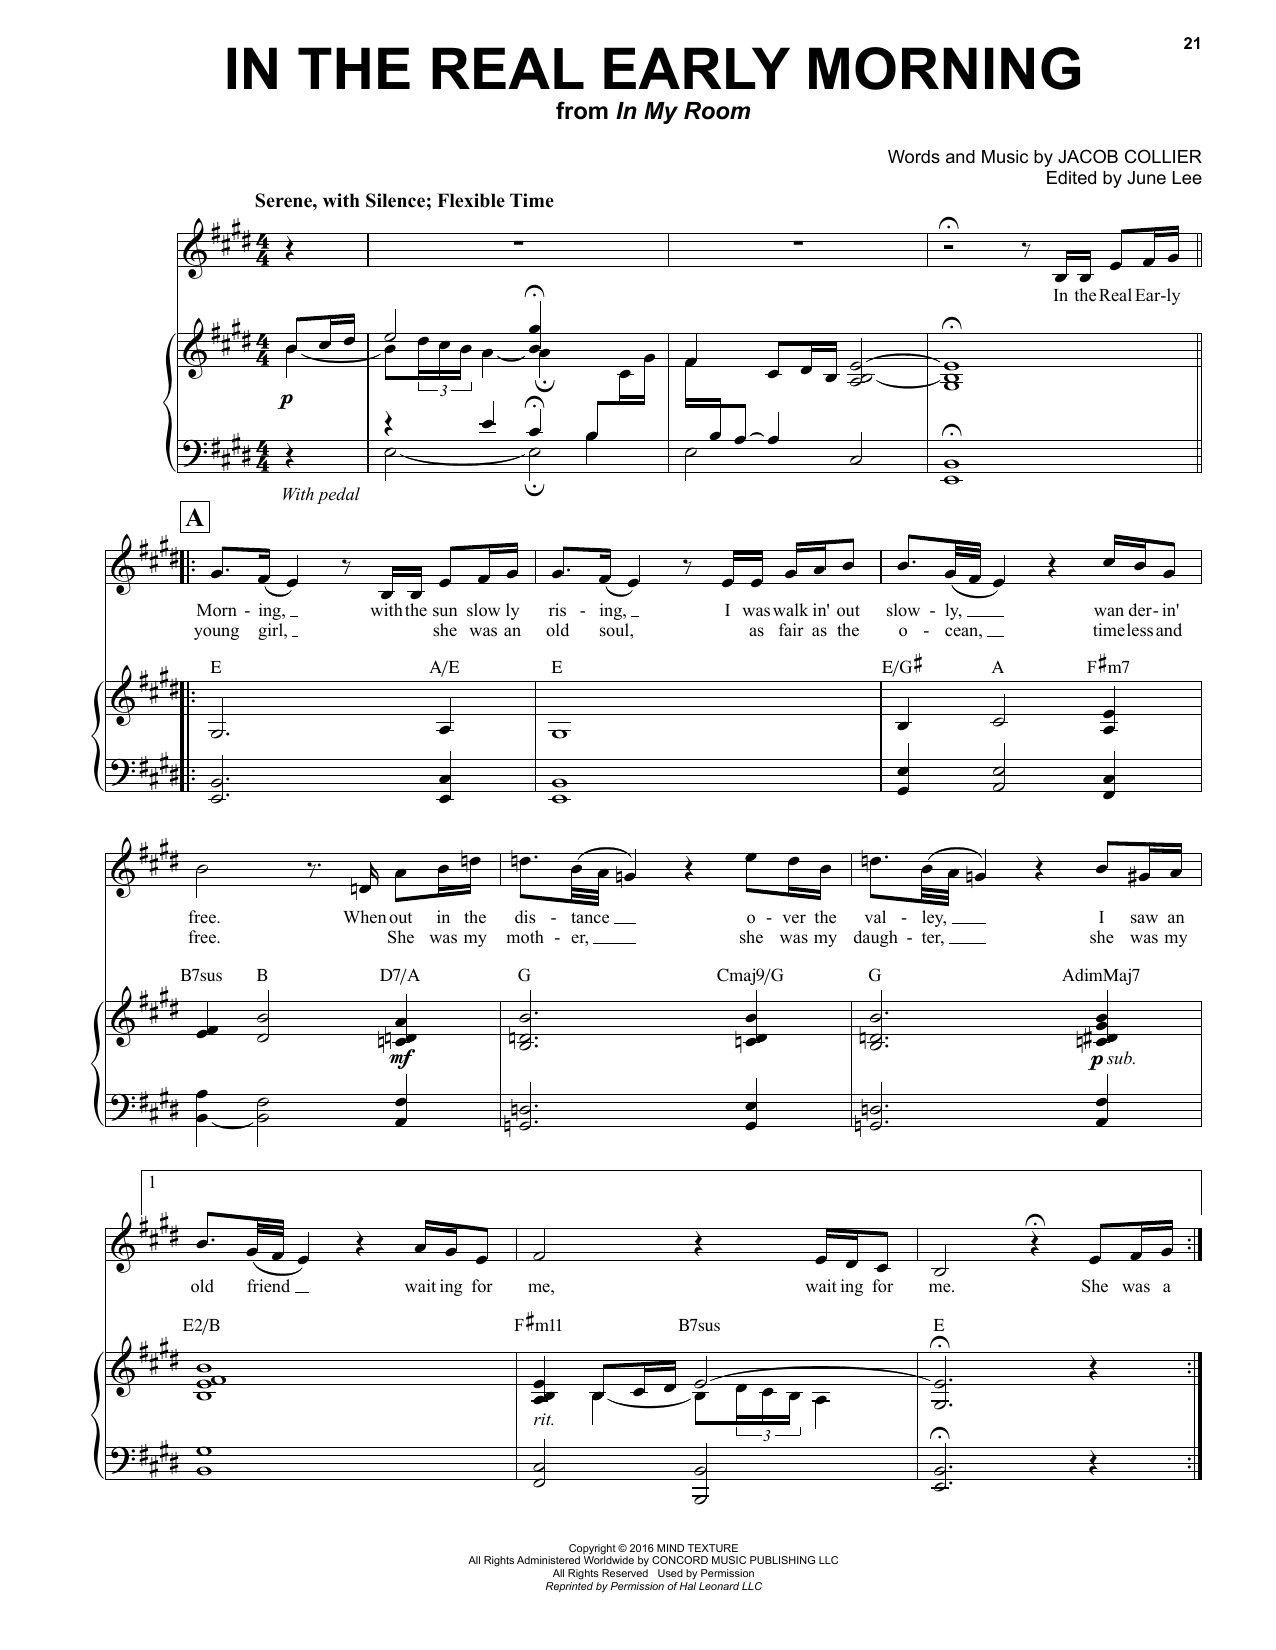 Jacob Collier In The Real Early Morning sheet music notes printable PDF score